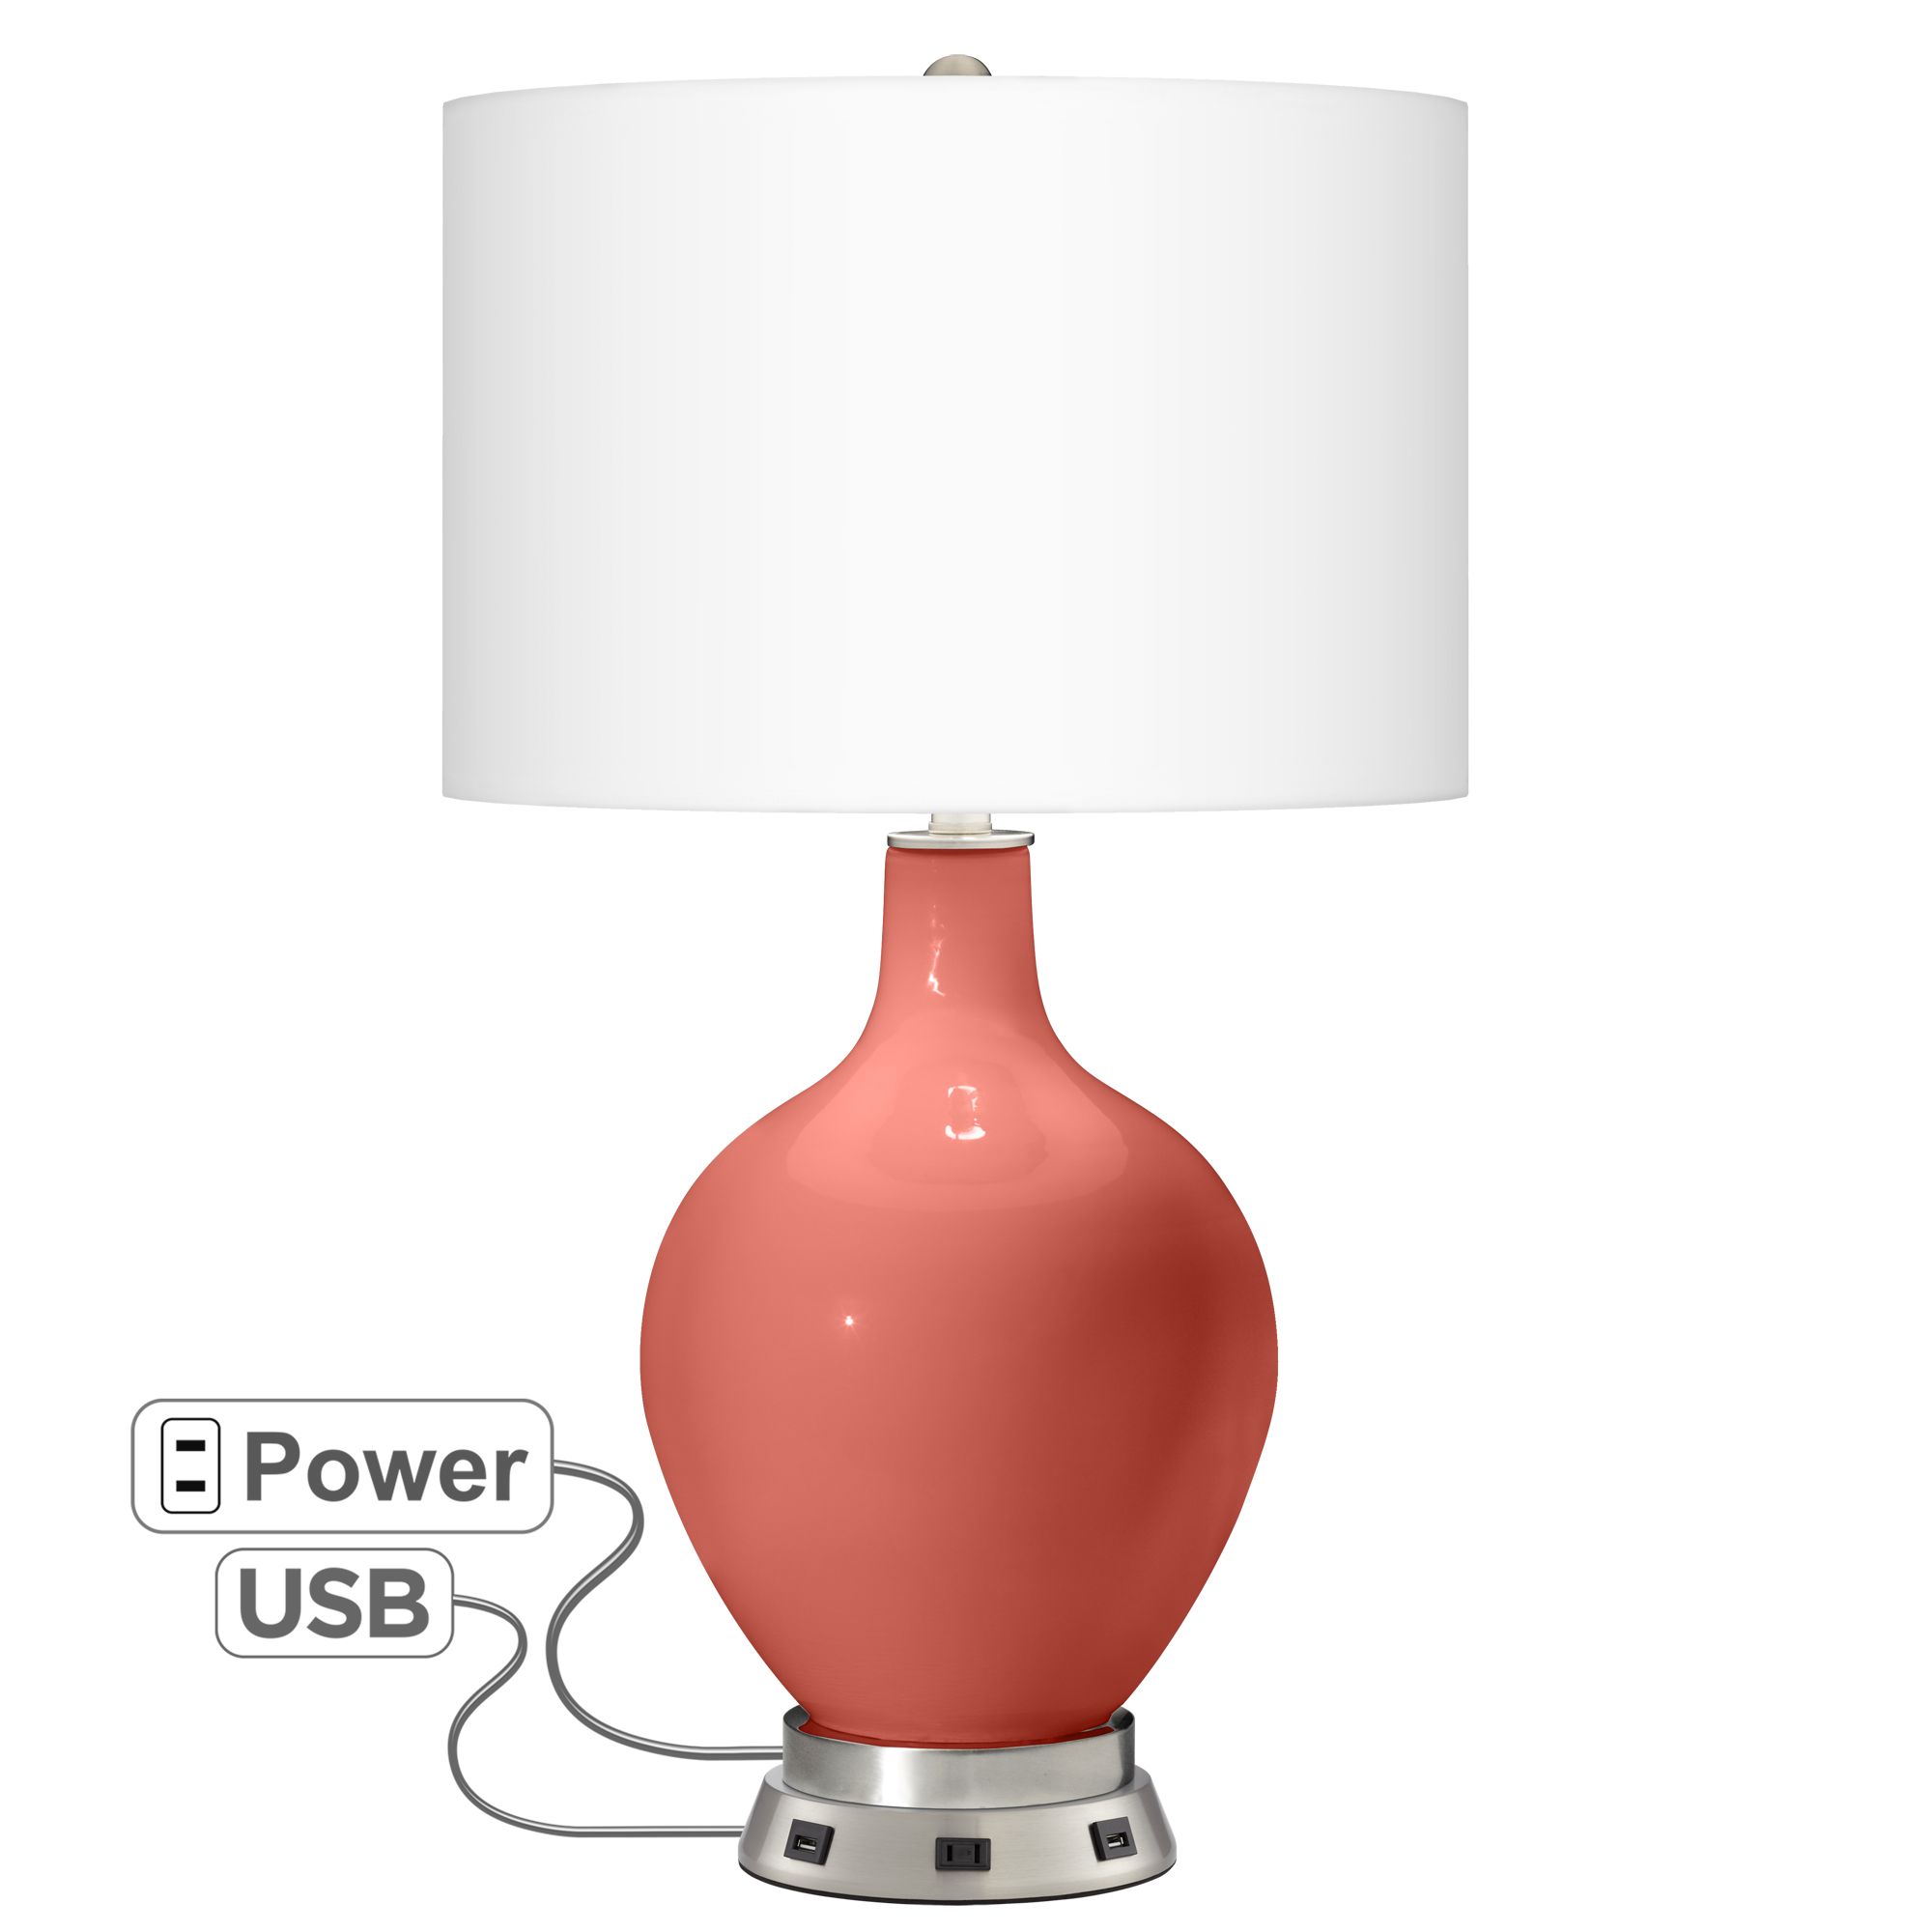 Coral Reef Ovo Table Lamp with USB Workstation Base